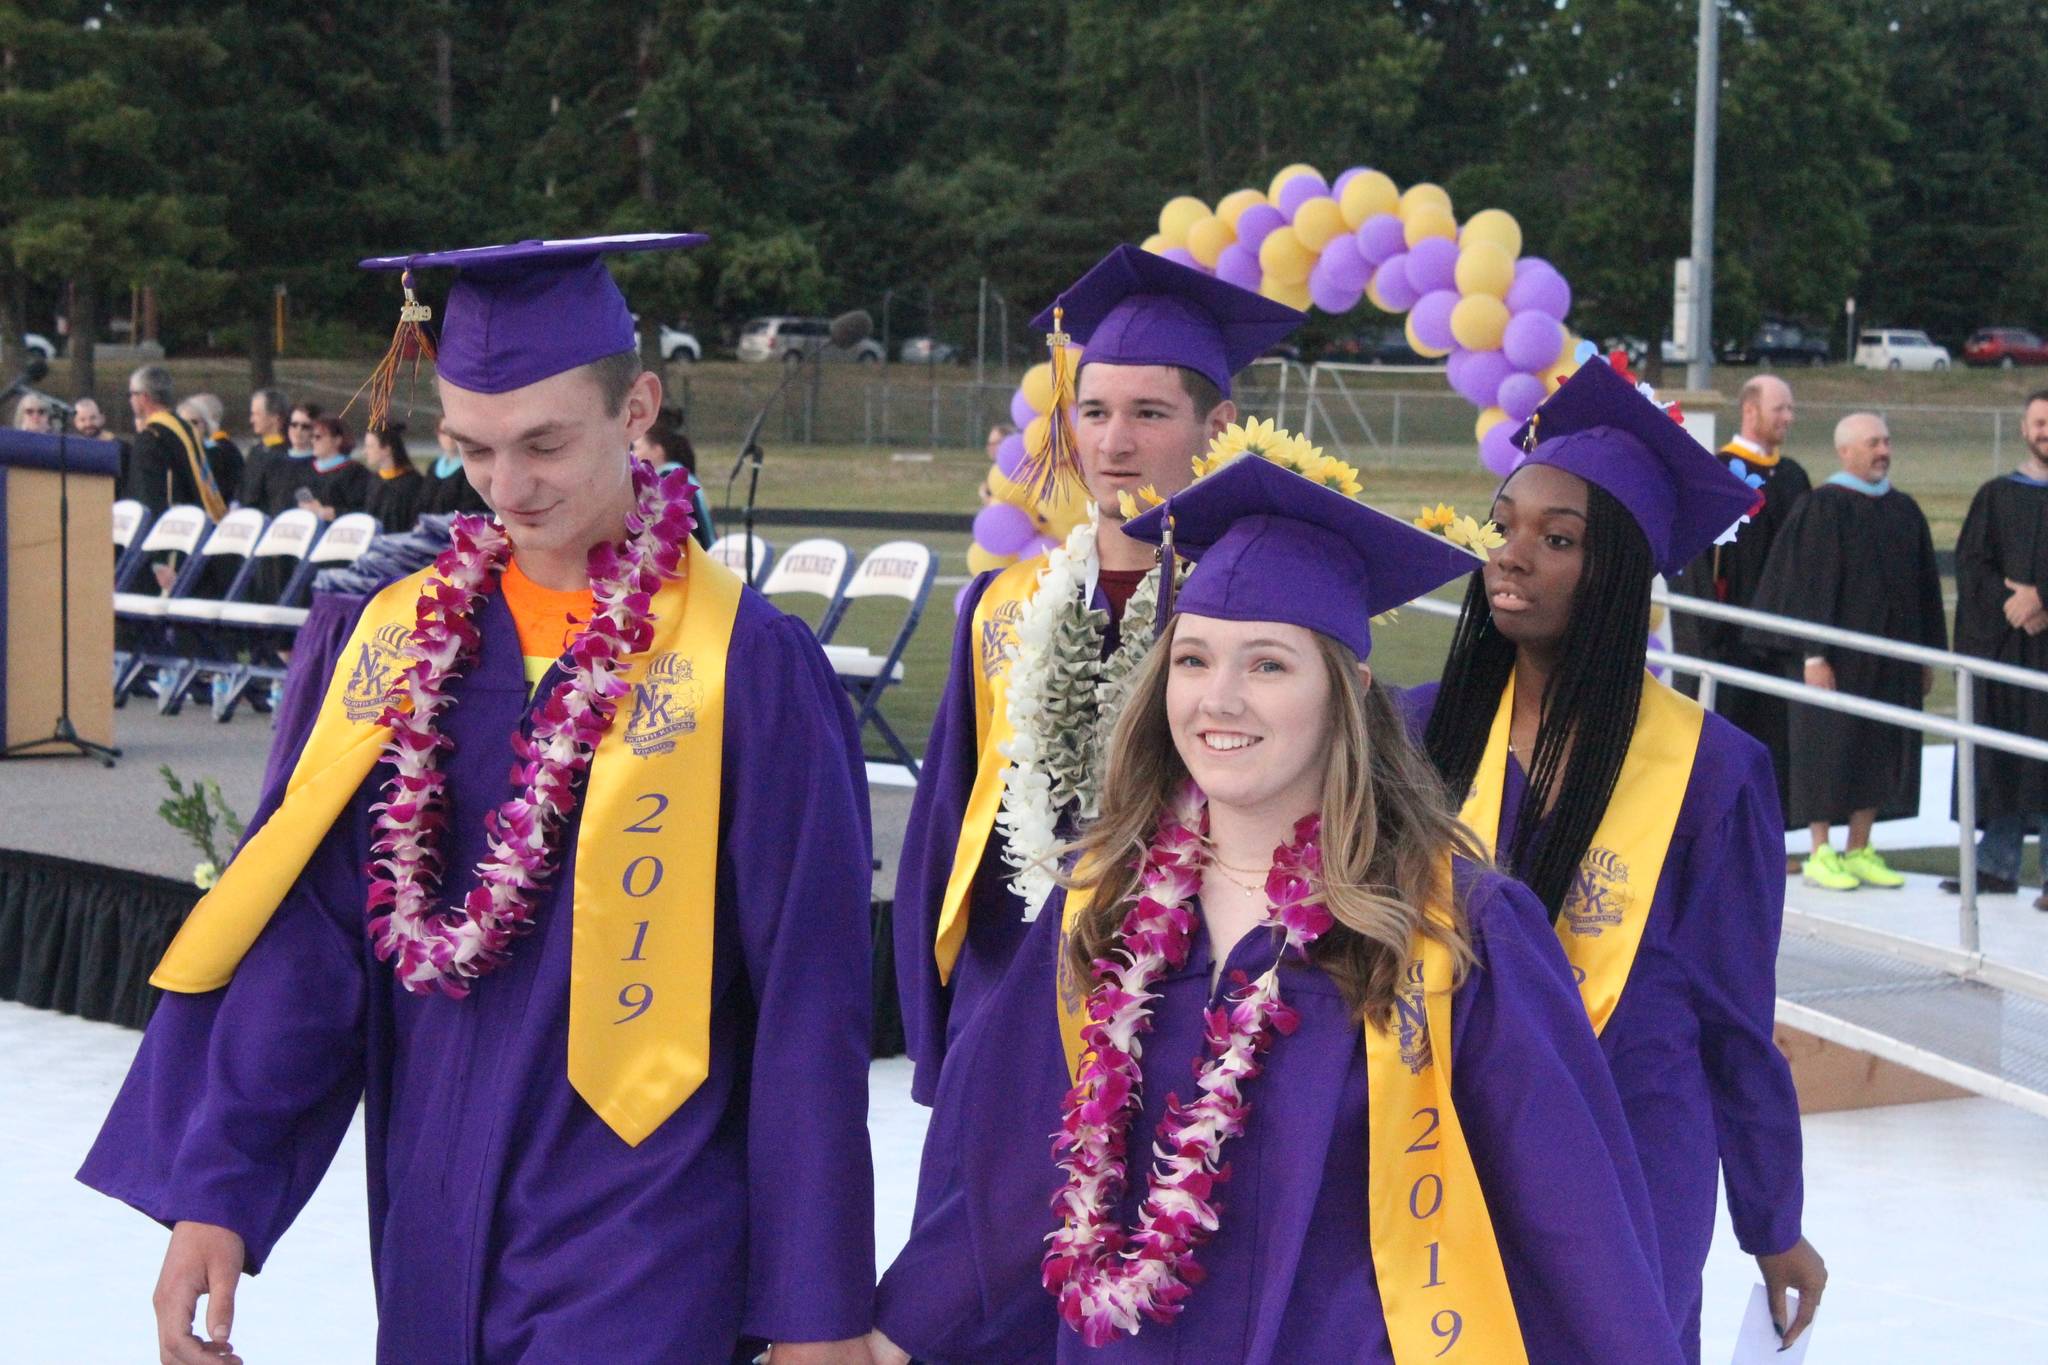 NKHS graduation: themes of luck, support and criticism fill grad speeches